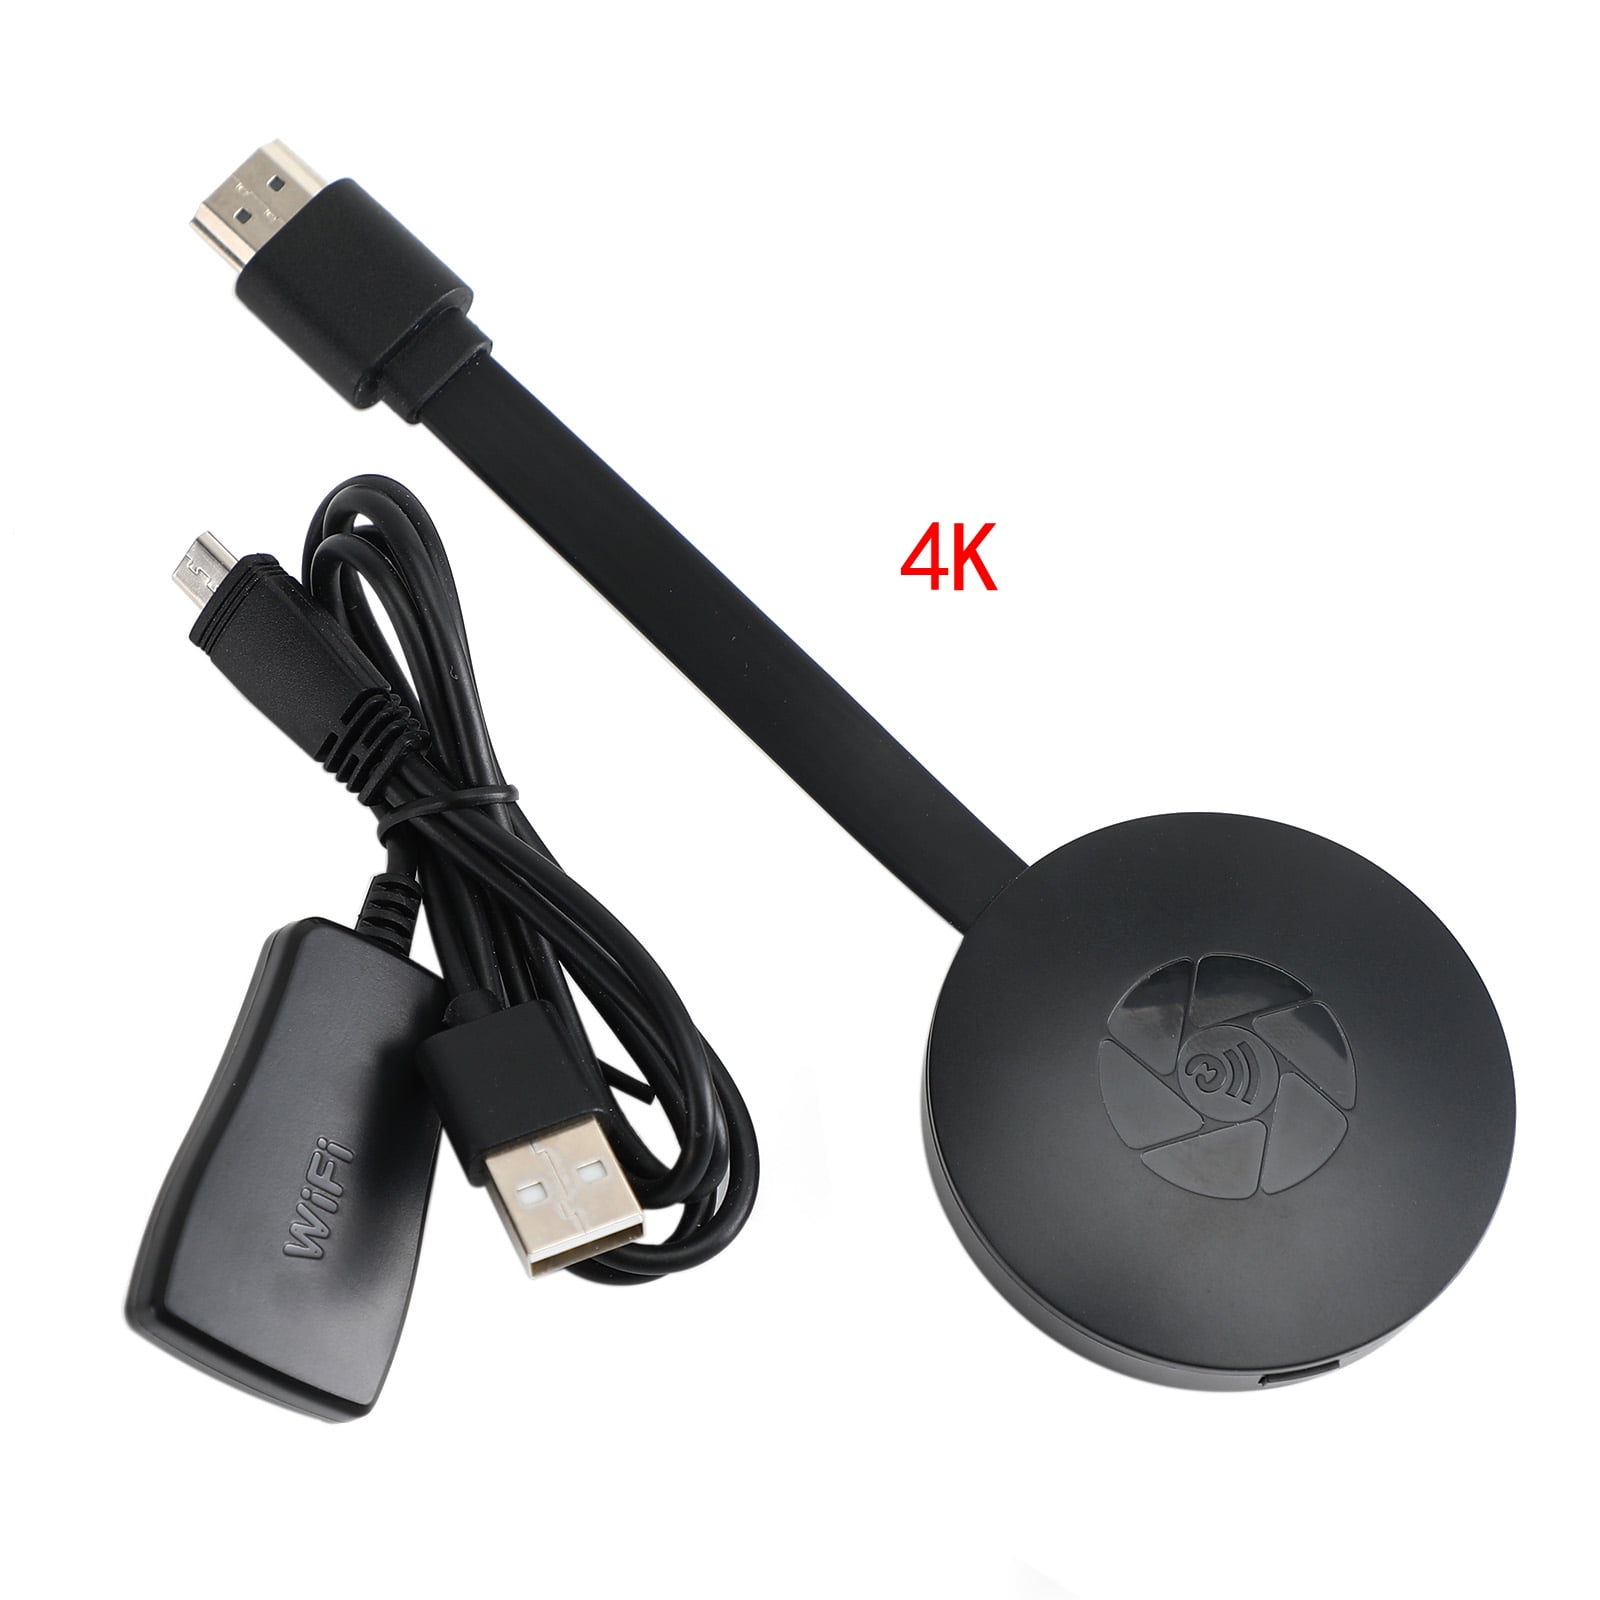 frill pessimistisk Kollektive 4K 1080P Wireless WiFi Display Dongle TV Stick HDMI G2 Adapter For IOS  Android - Walmart.com